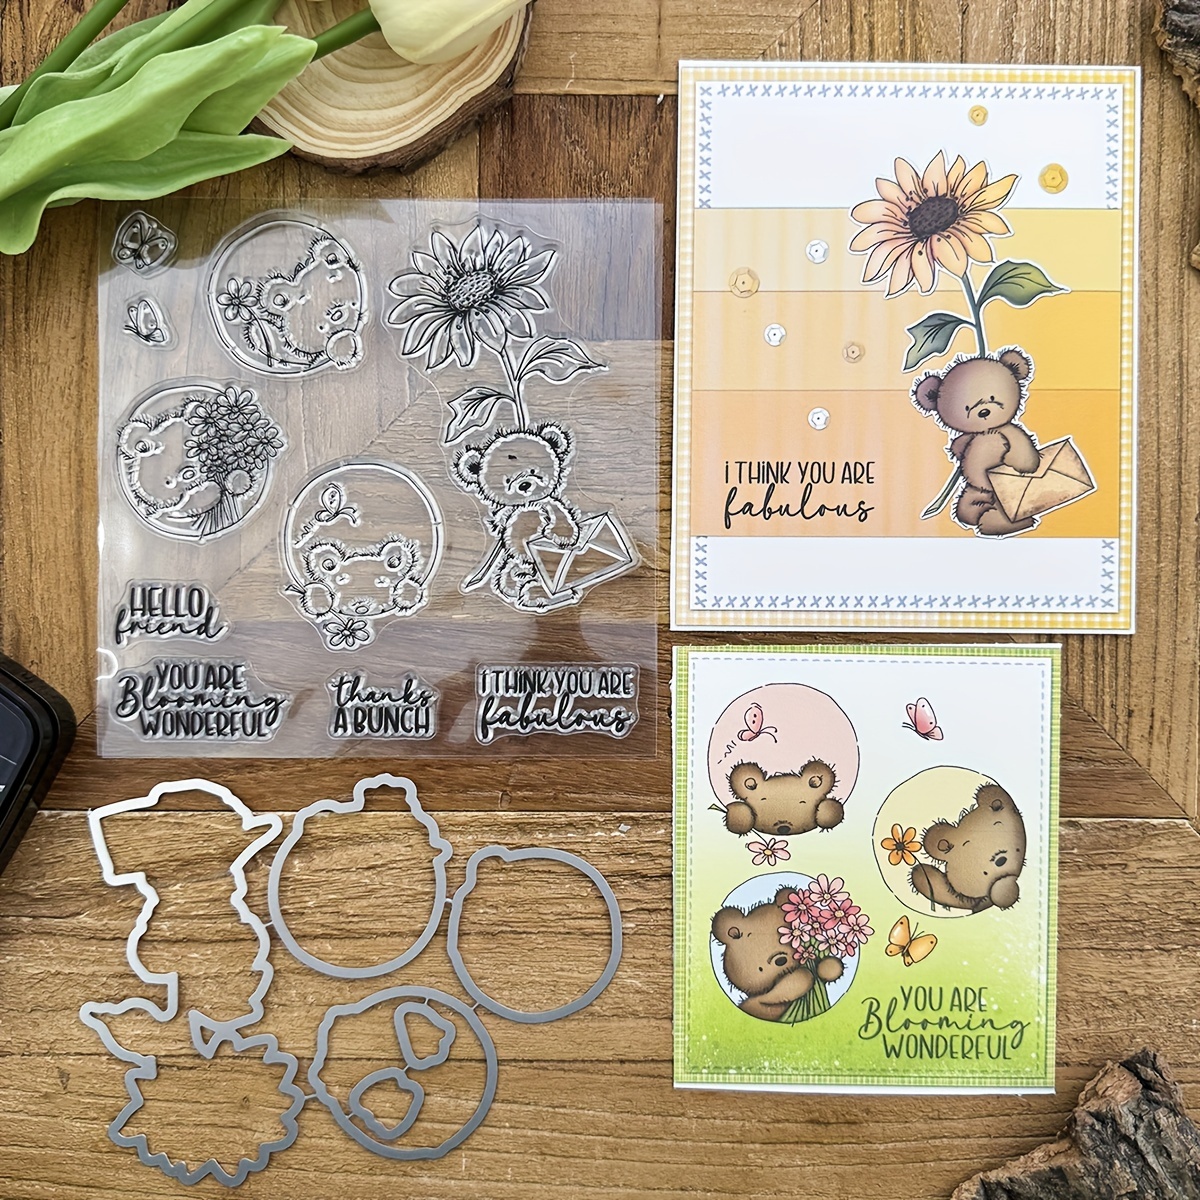 

Original Lovely Bunch Of Flowers Bears Clear Stamps And Metal Cutting Dies For Cards Decoration Scrapbook Diy Paper Craft Interesting Coloring Stamps Diary Album Decoration Eid Al-adha Mubarak